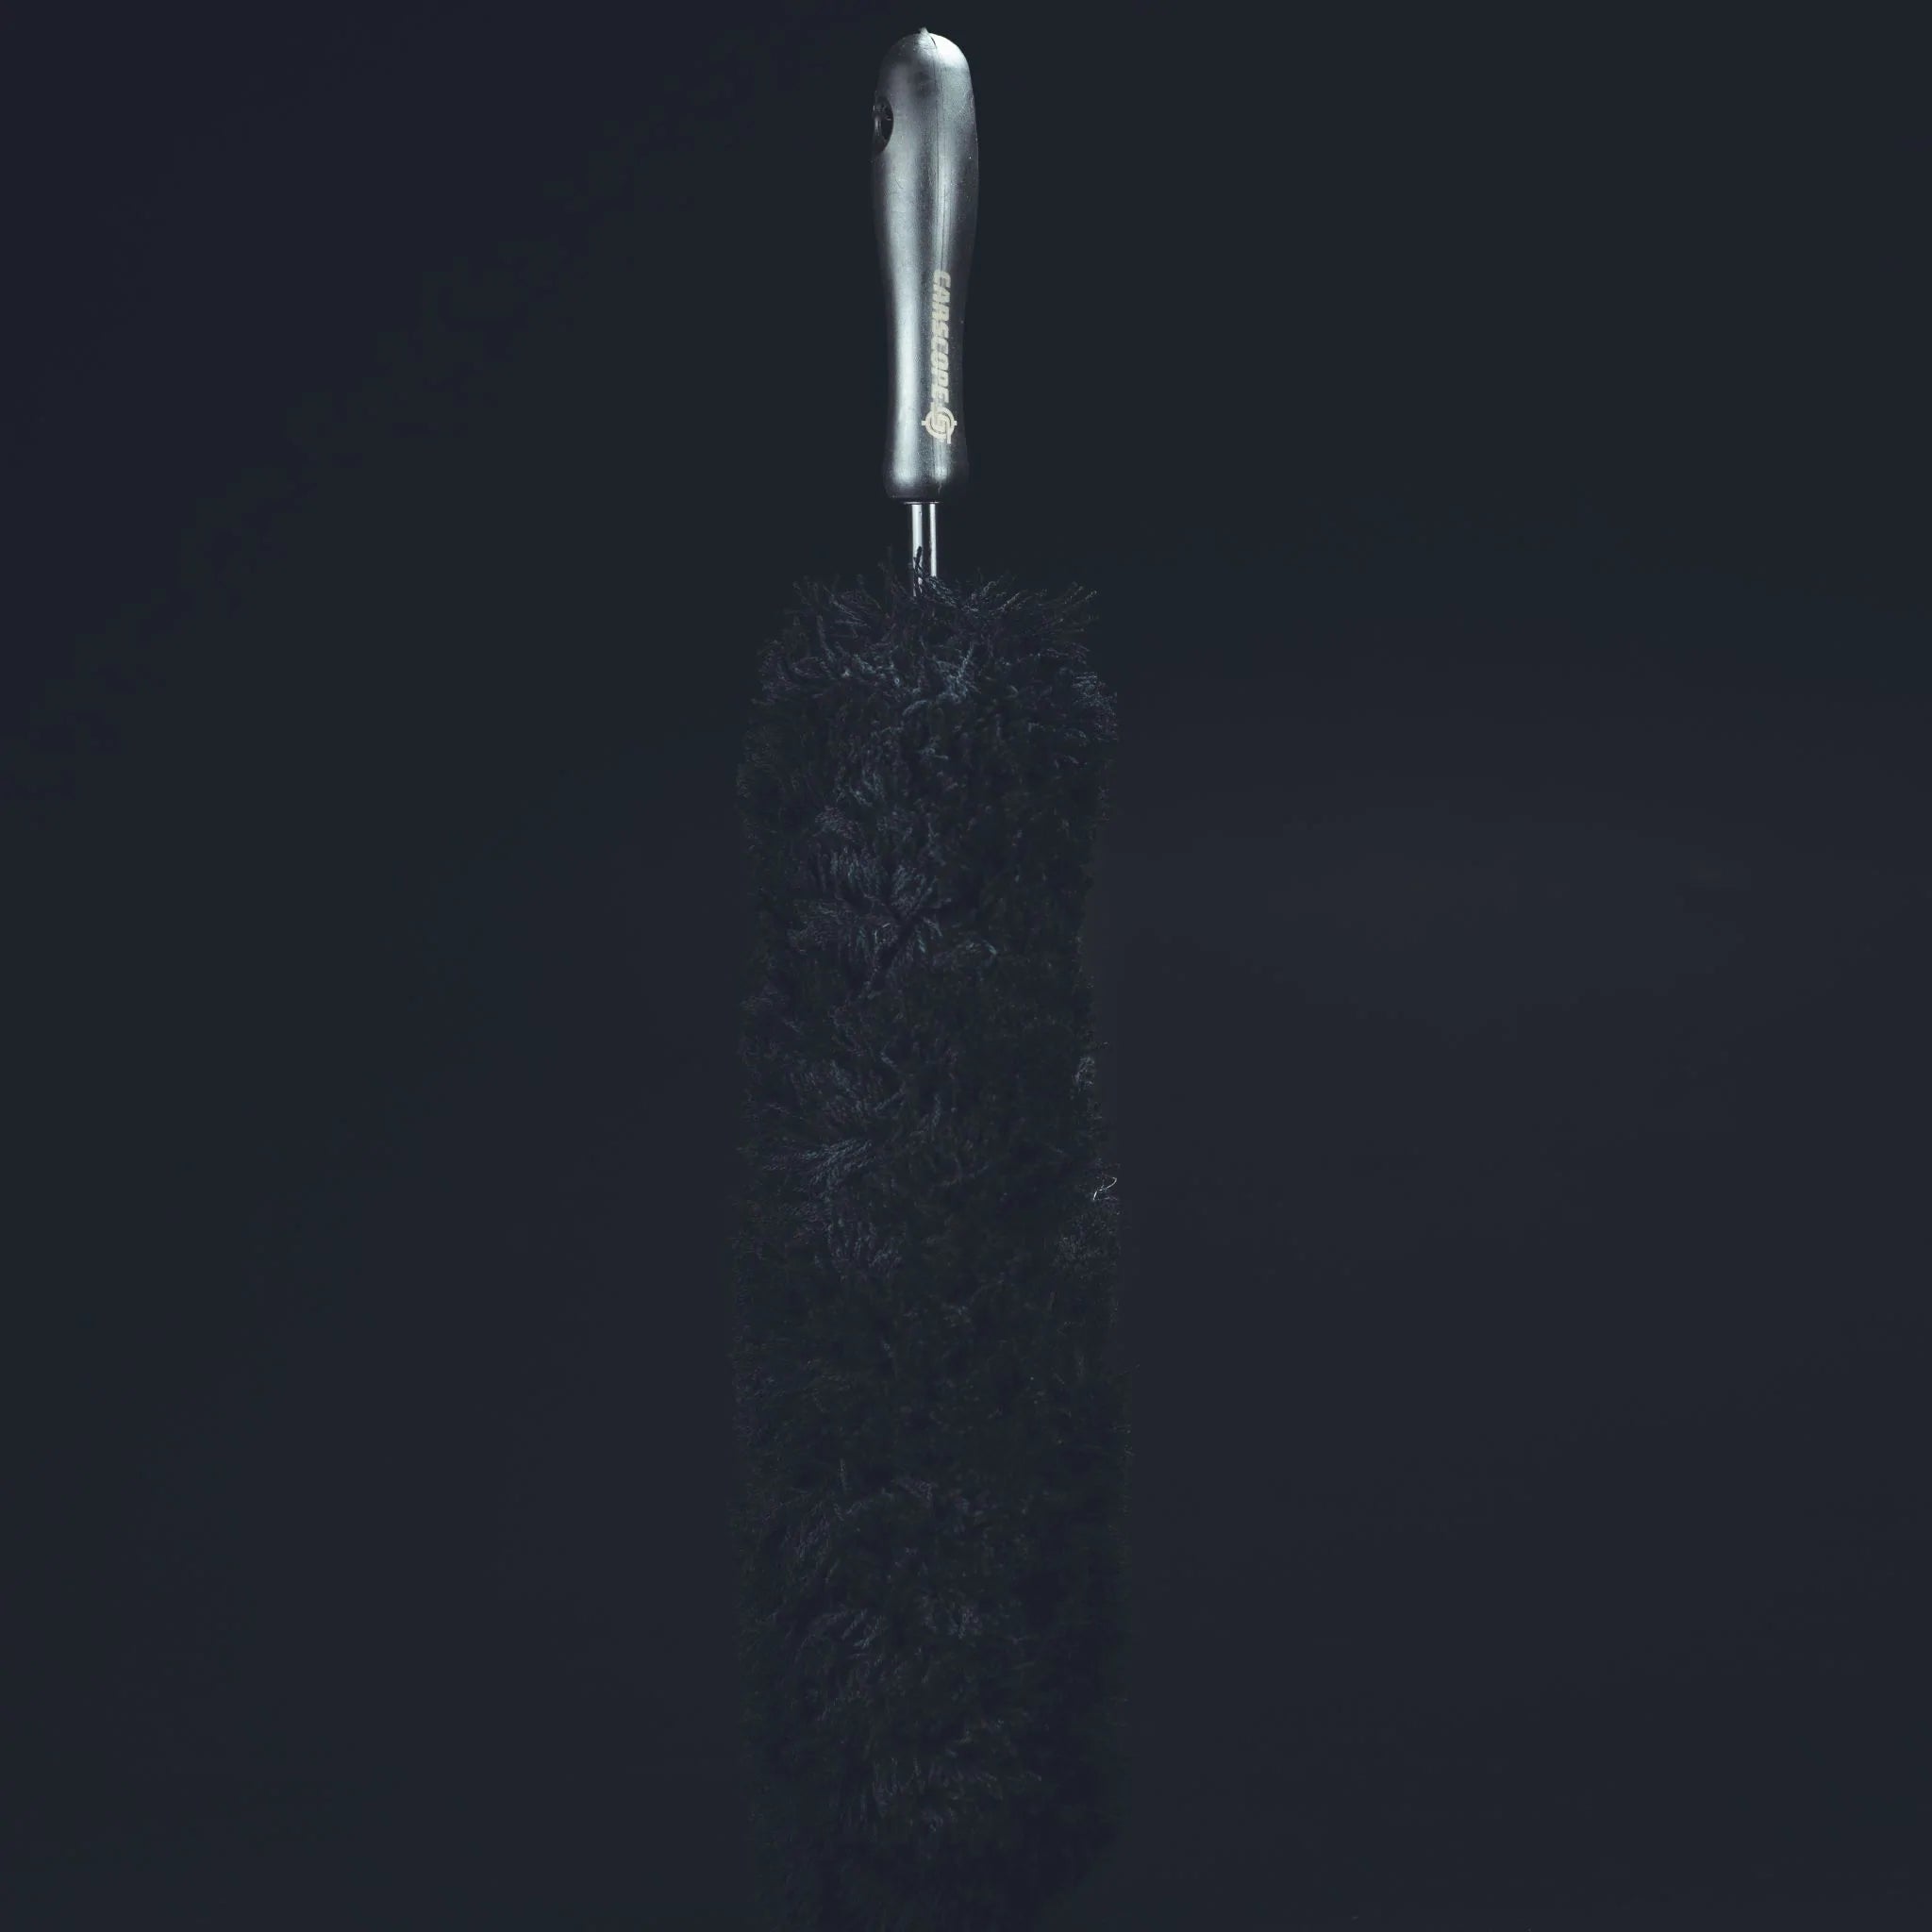 CarScope Tyre Brush - Is it a must have? 